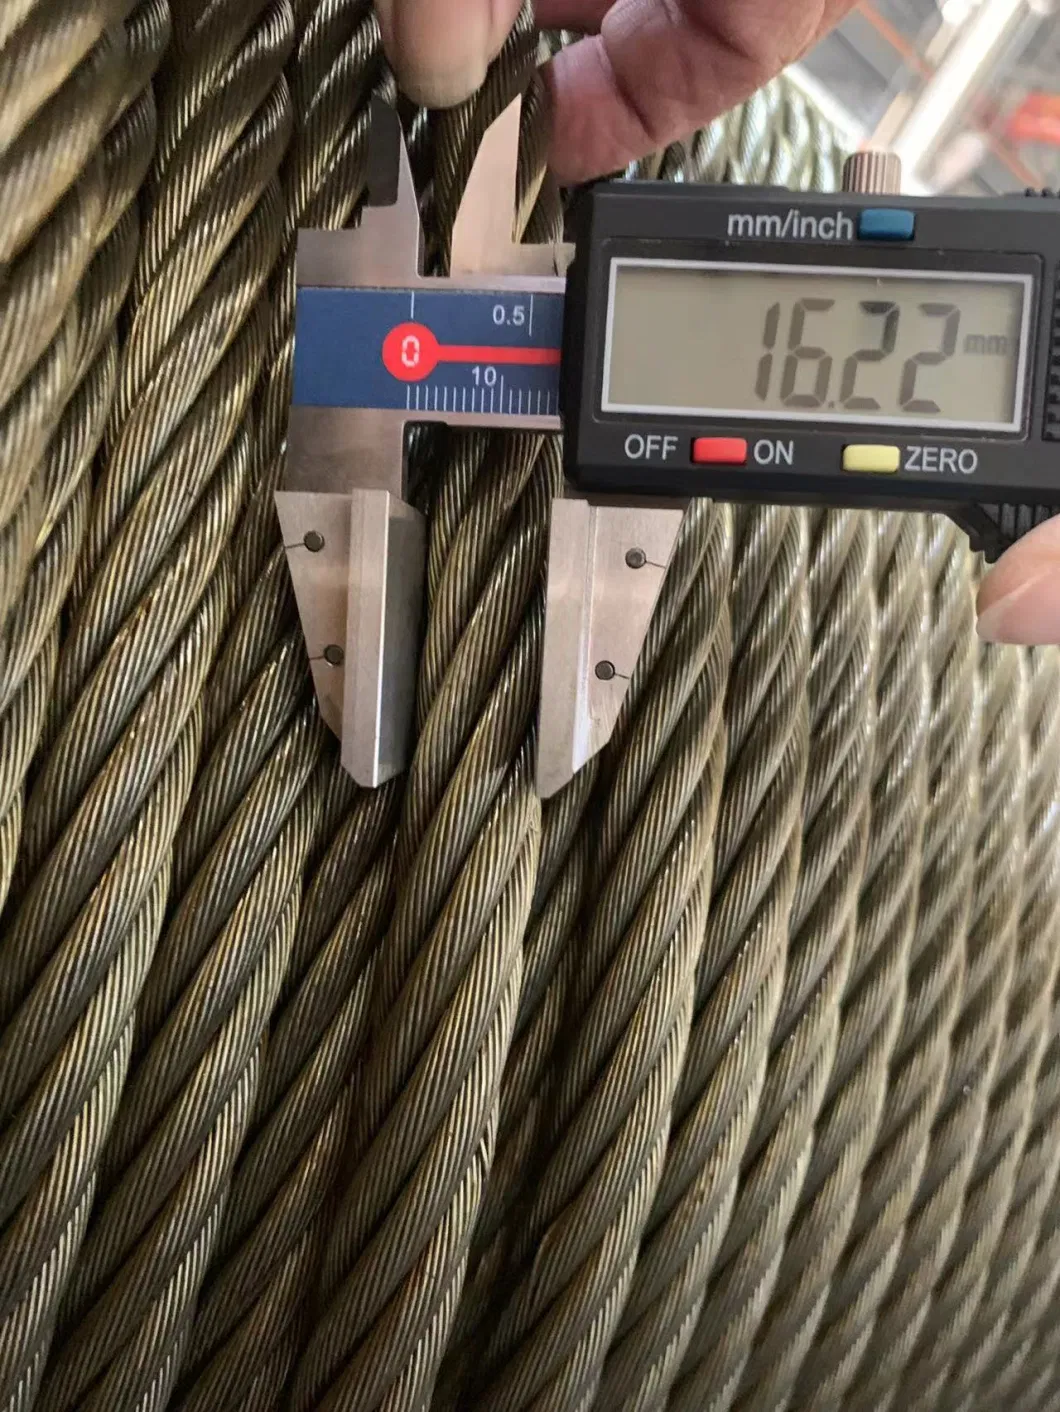 6X26sw+FC Ungalvanized Steel Wire Rope Steel Cable High Carbon with Oil